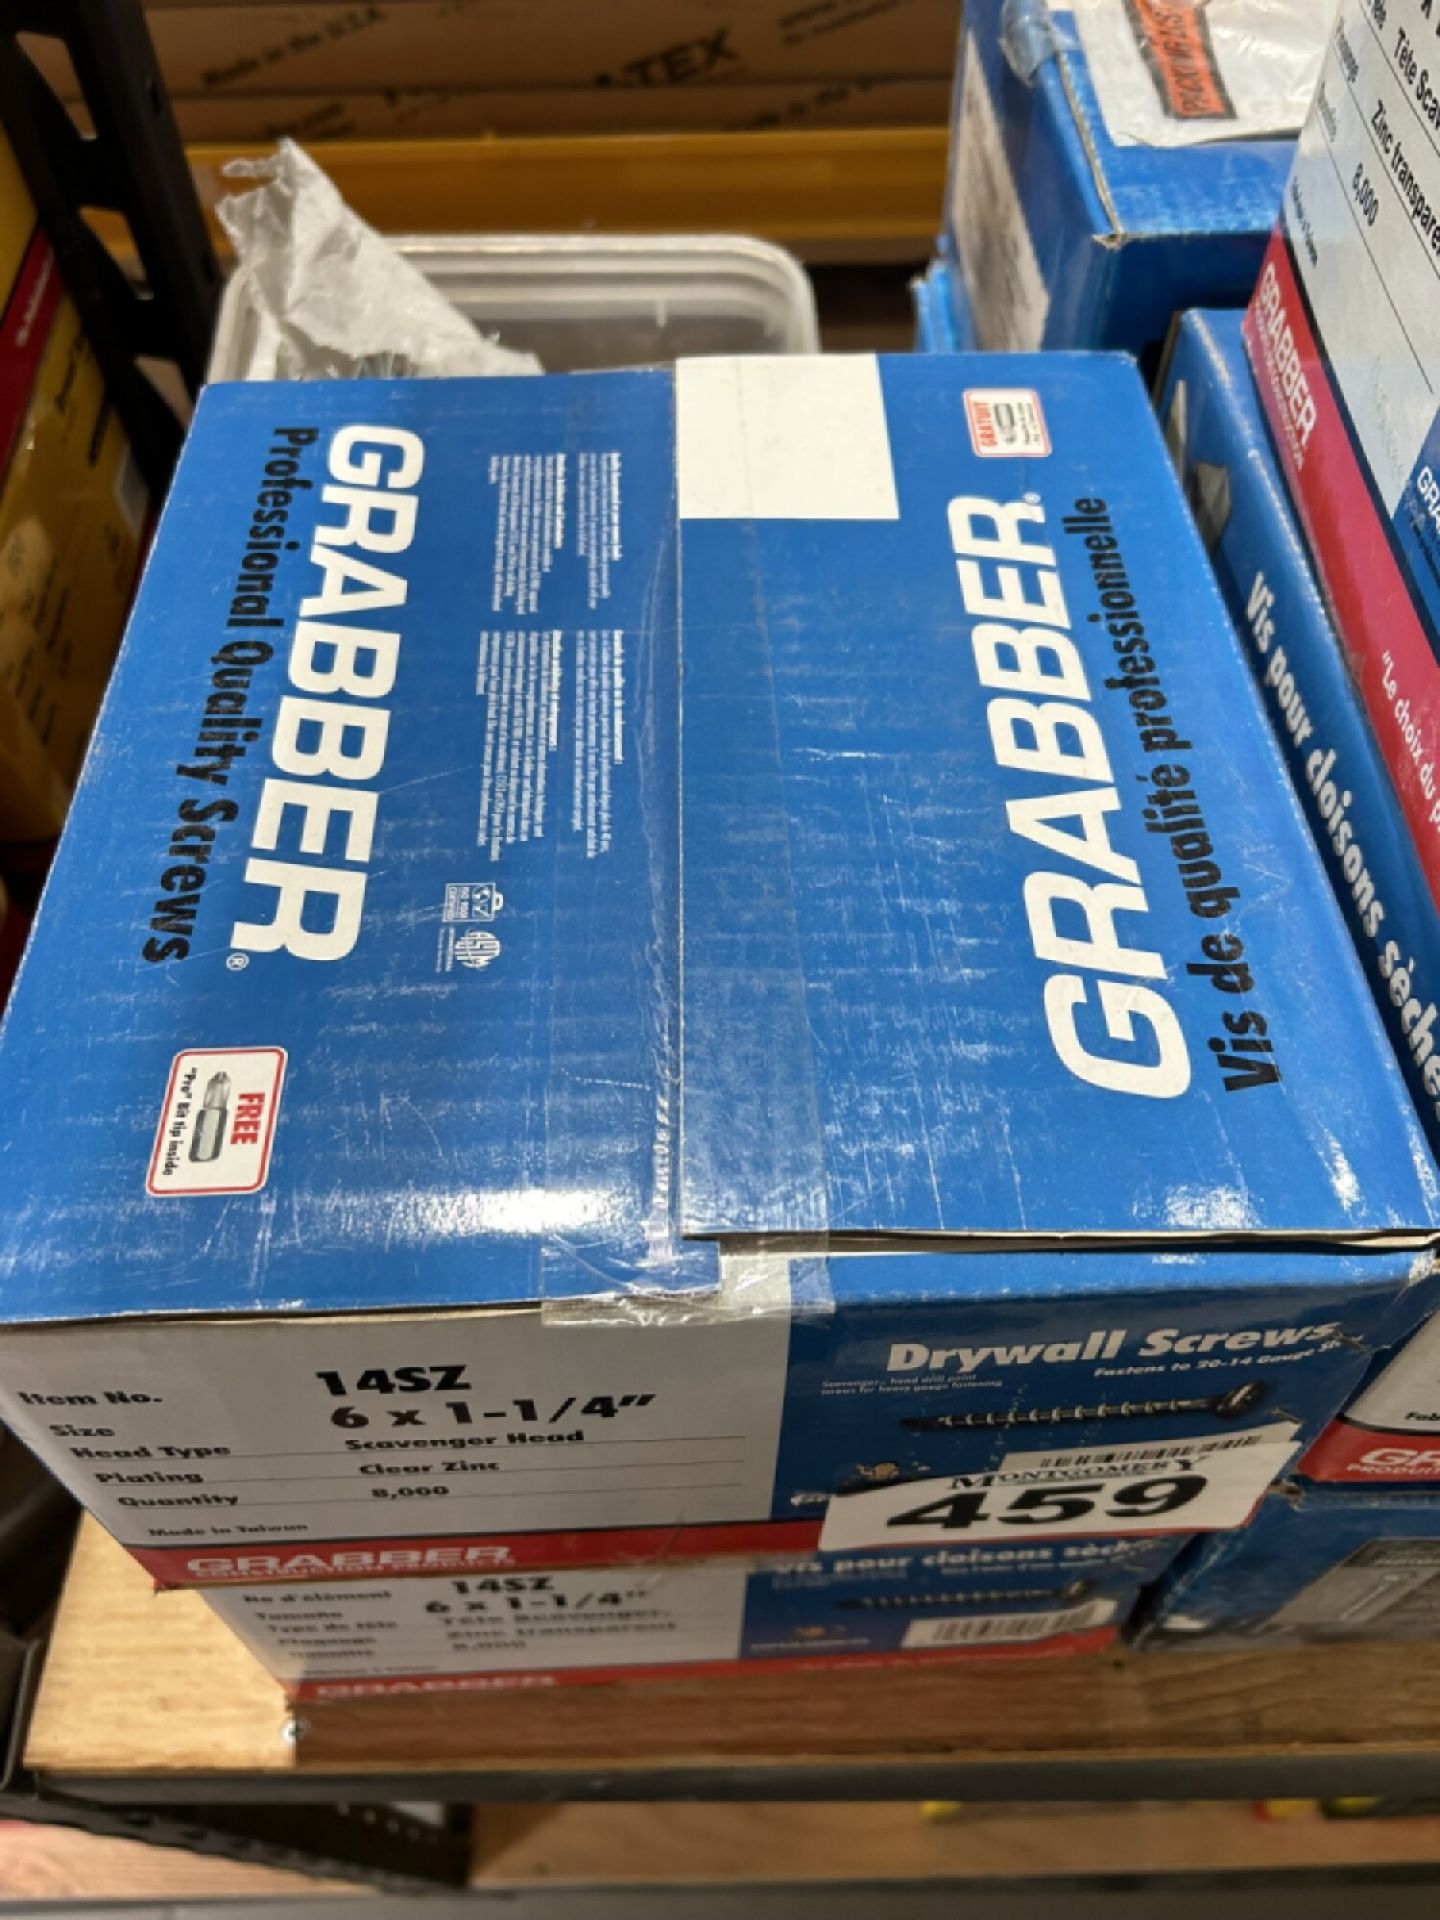 2-BOXES OF GRABBER 6X1.25" CLEAR ZINC DRYWALL SCREWS AND ASSORTED DRYWALL SCREWS - Image 3 of 5